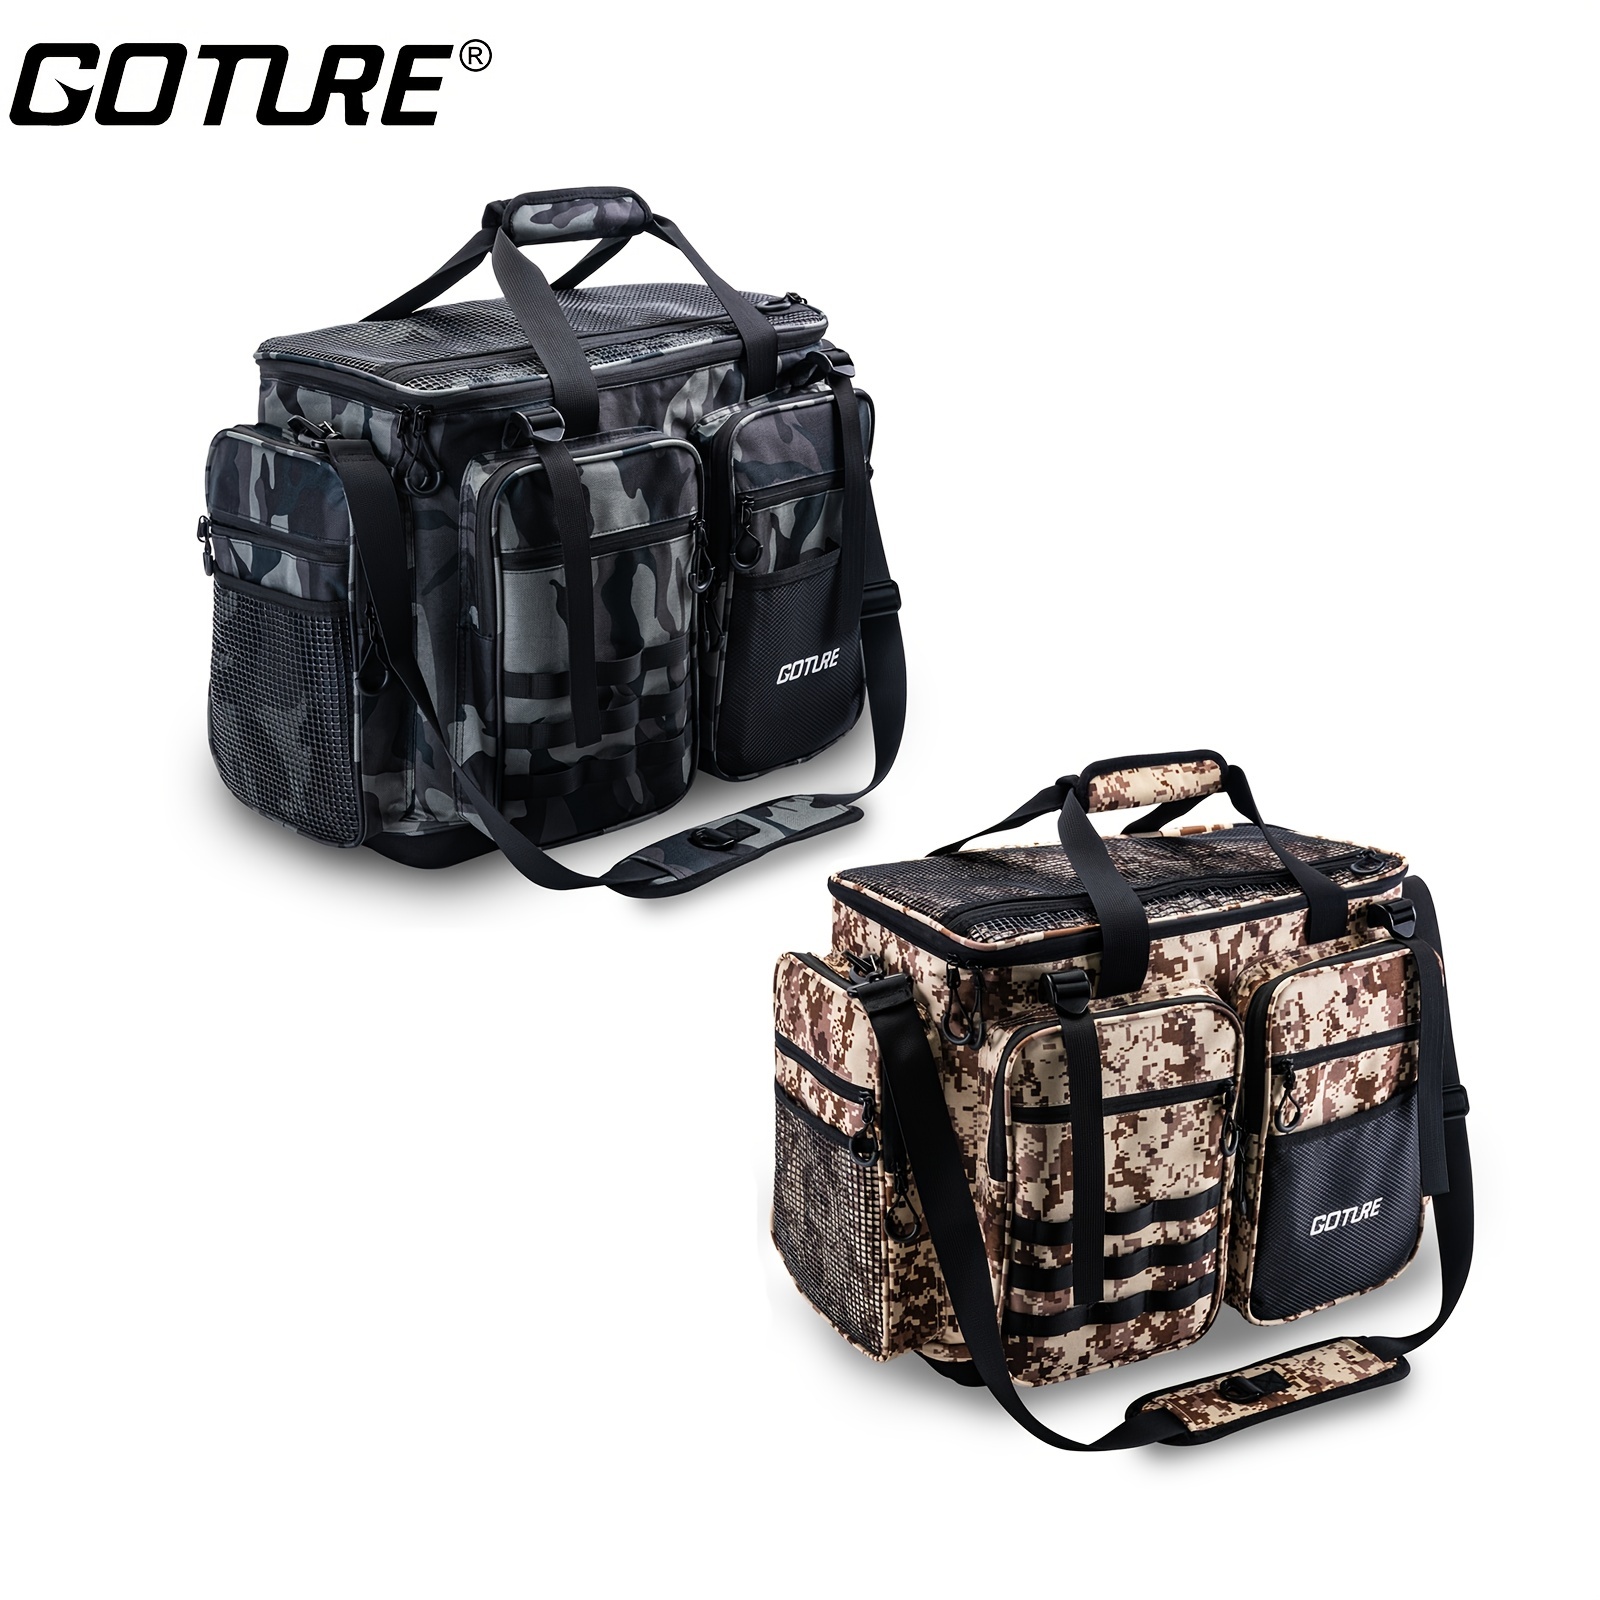  Goture Large Tackle Bag,Store Up to 8PCS 3700 Plus 4PCS 3600 Tackle  Trays,Water Resistant Large Tackle Bag,Saltwater Fishing Gear Bag,Big Fishing  Bag,Removable Dividers(20.8x15.2x11.4)-Camo : Sports & Outdoors